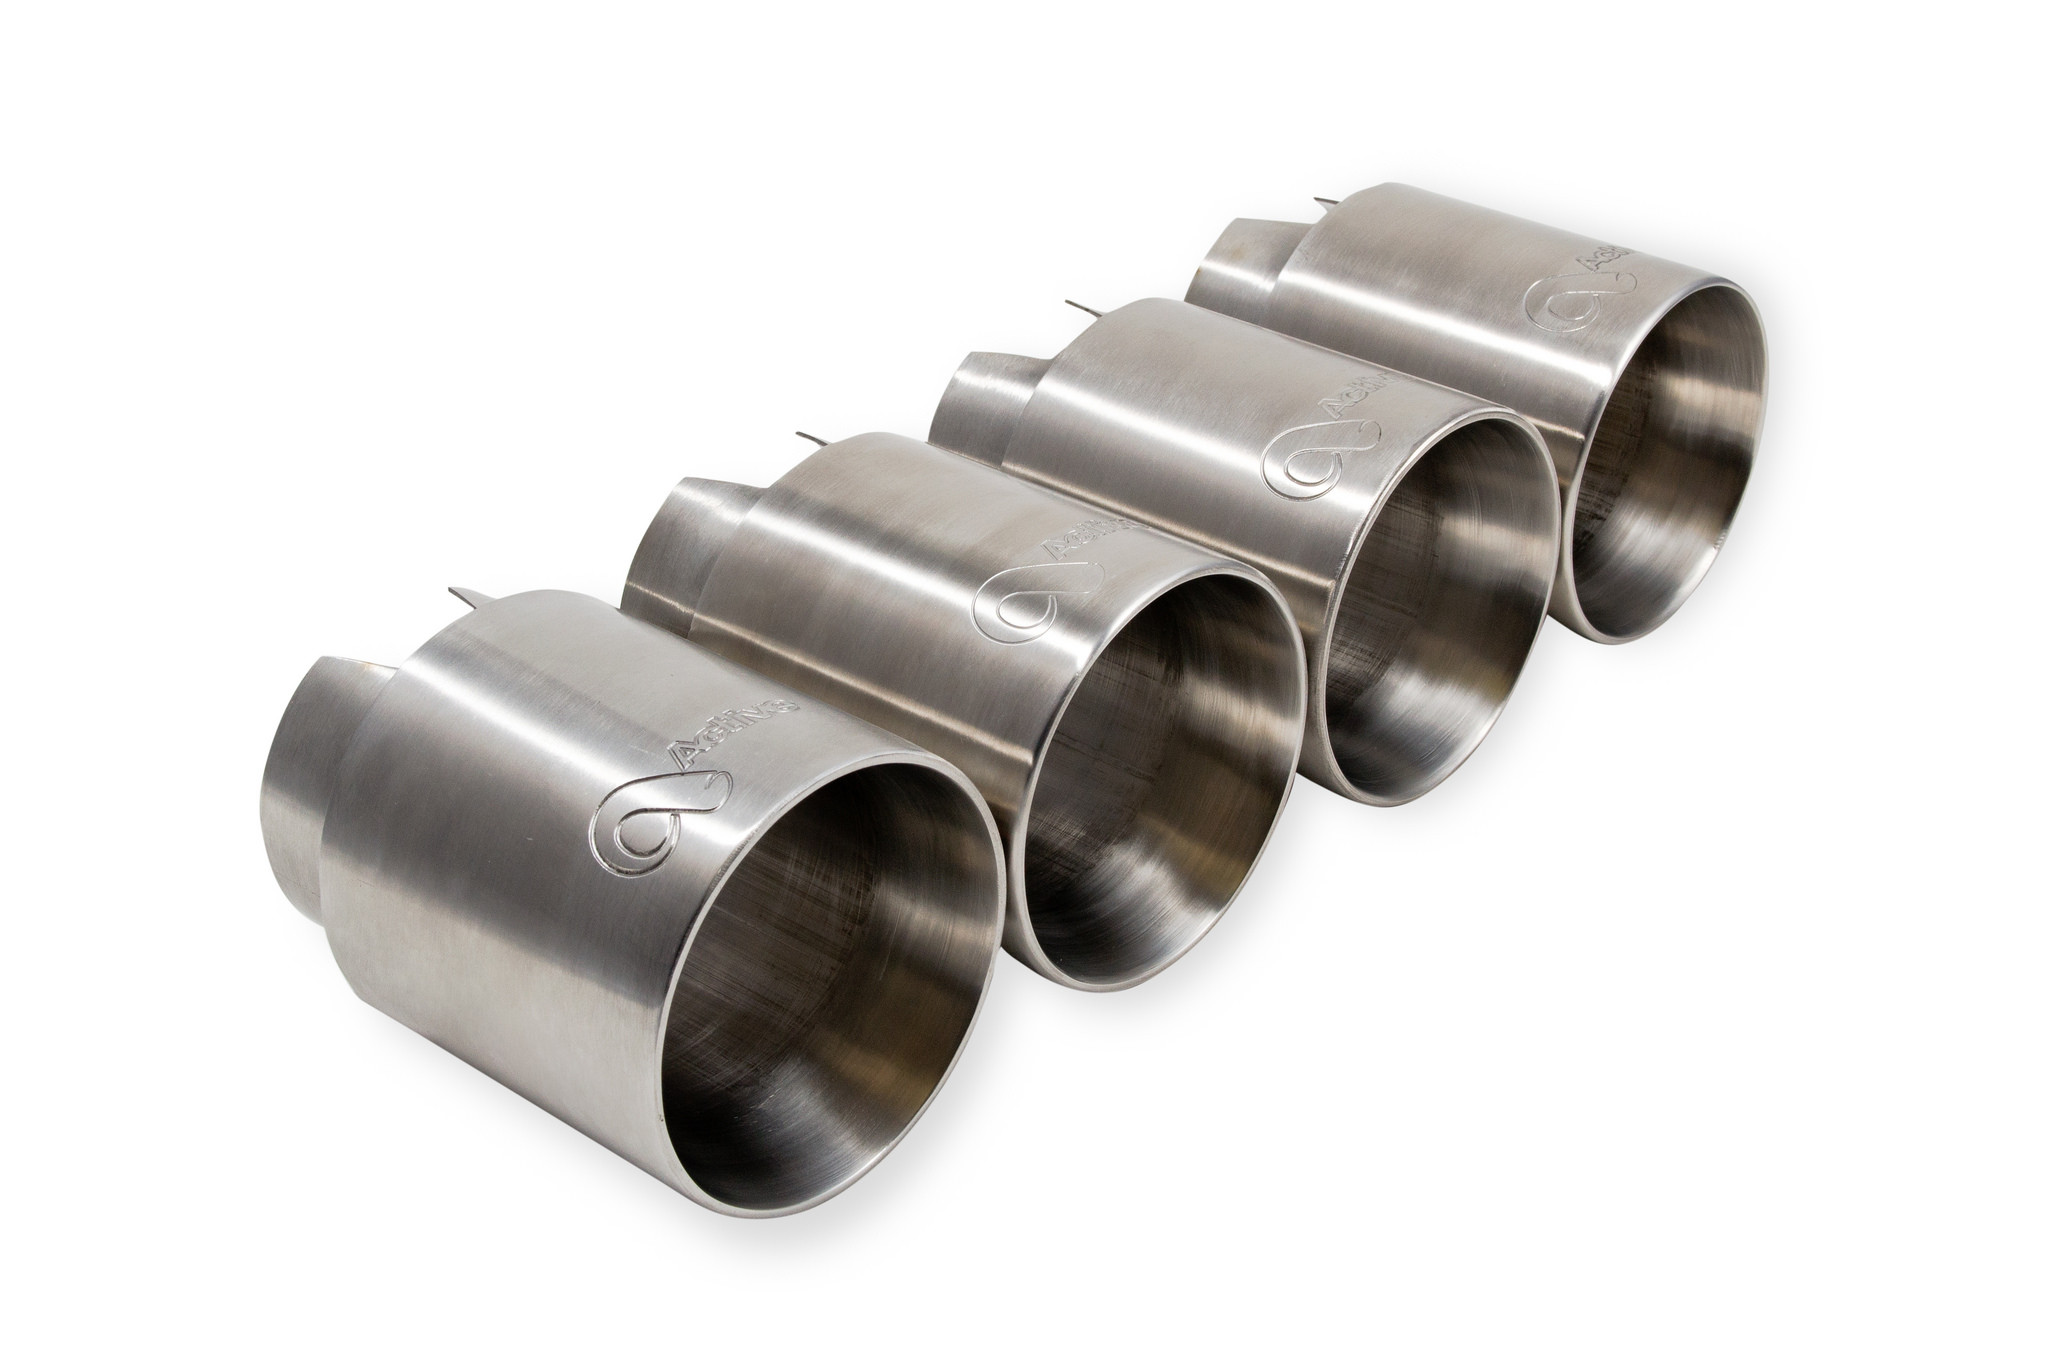 Active Autowerke BMW F80/F82 M3 and m4 exhaust tip 